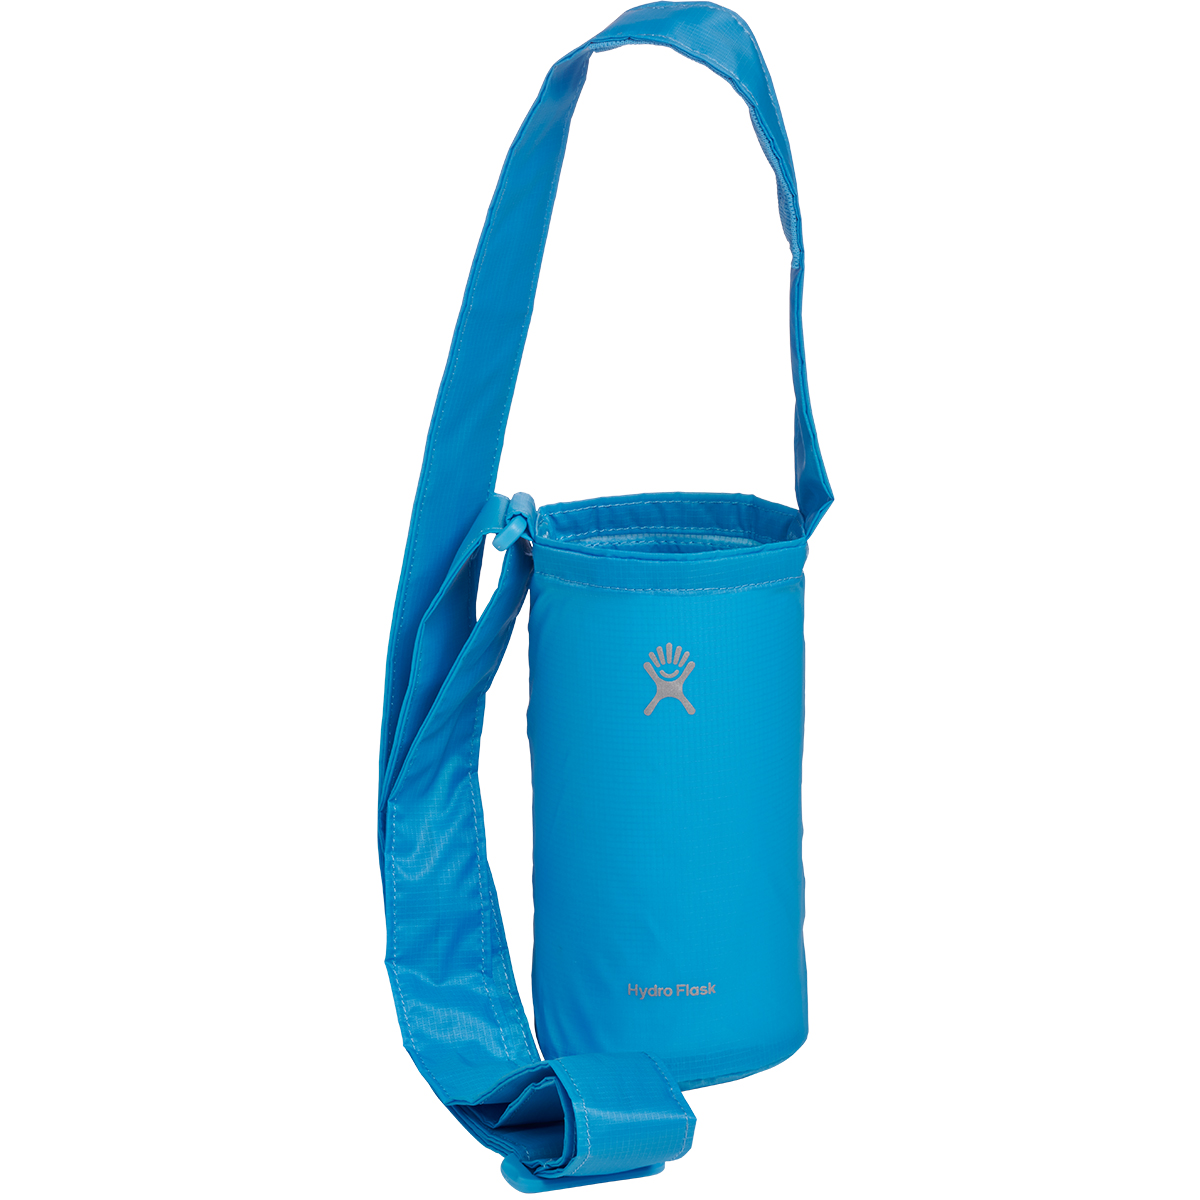 Hydro Flask Tag Along Small Bottle Sling